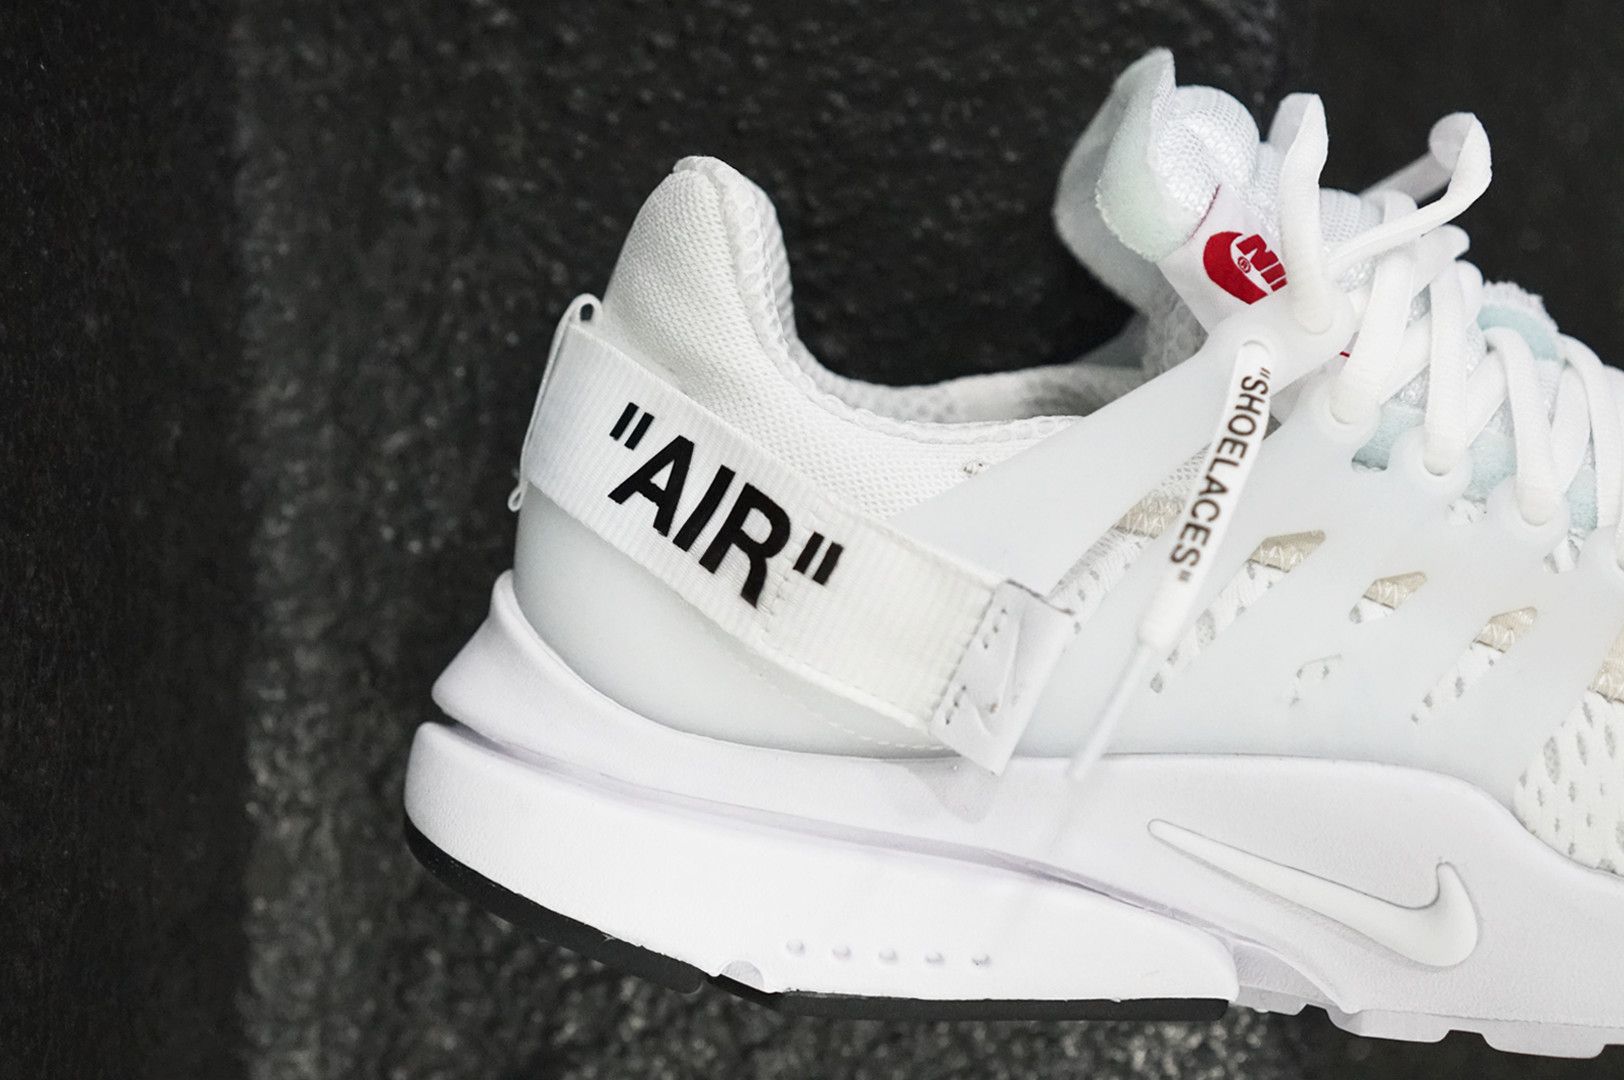 OFF-WHITE x Nike Air Presto White Releasing Later This Month •